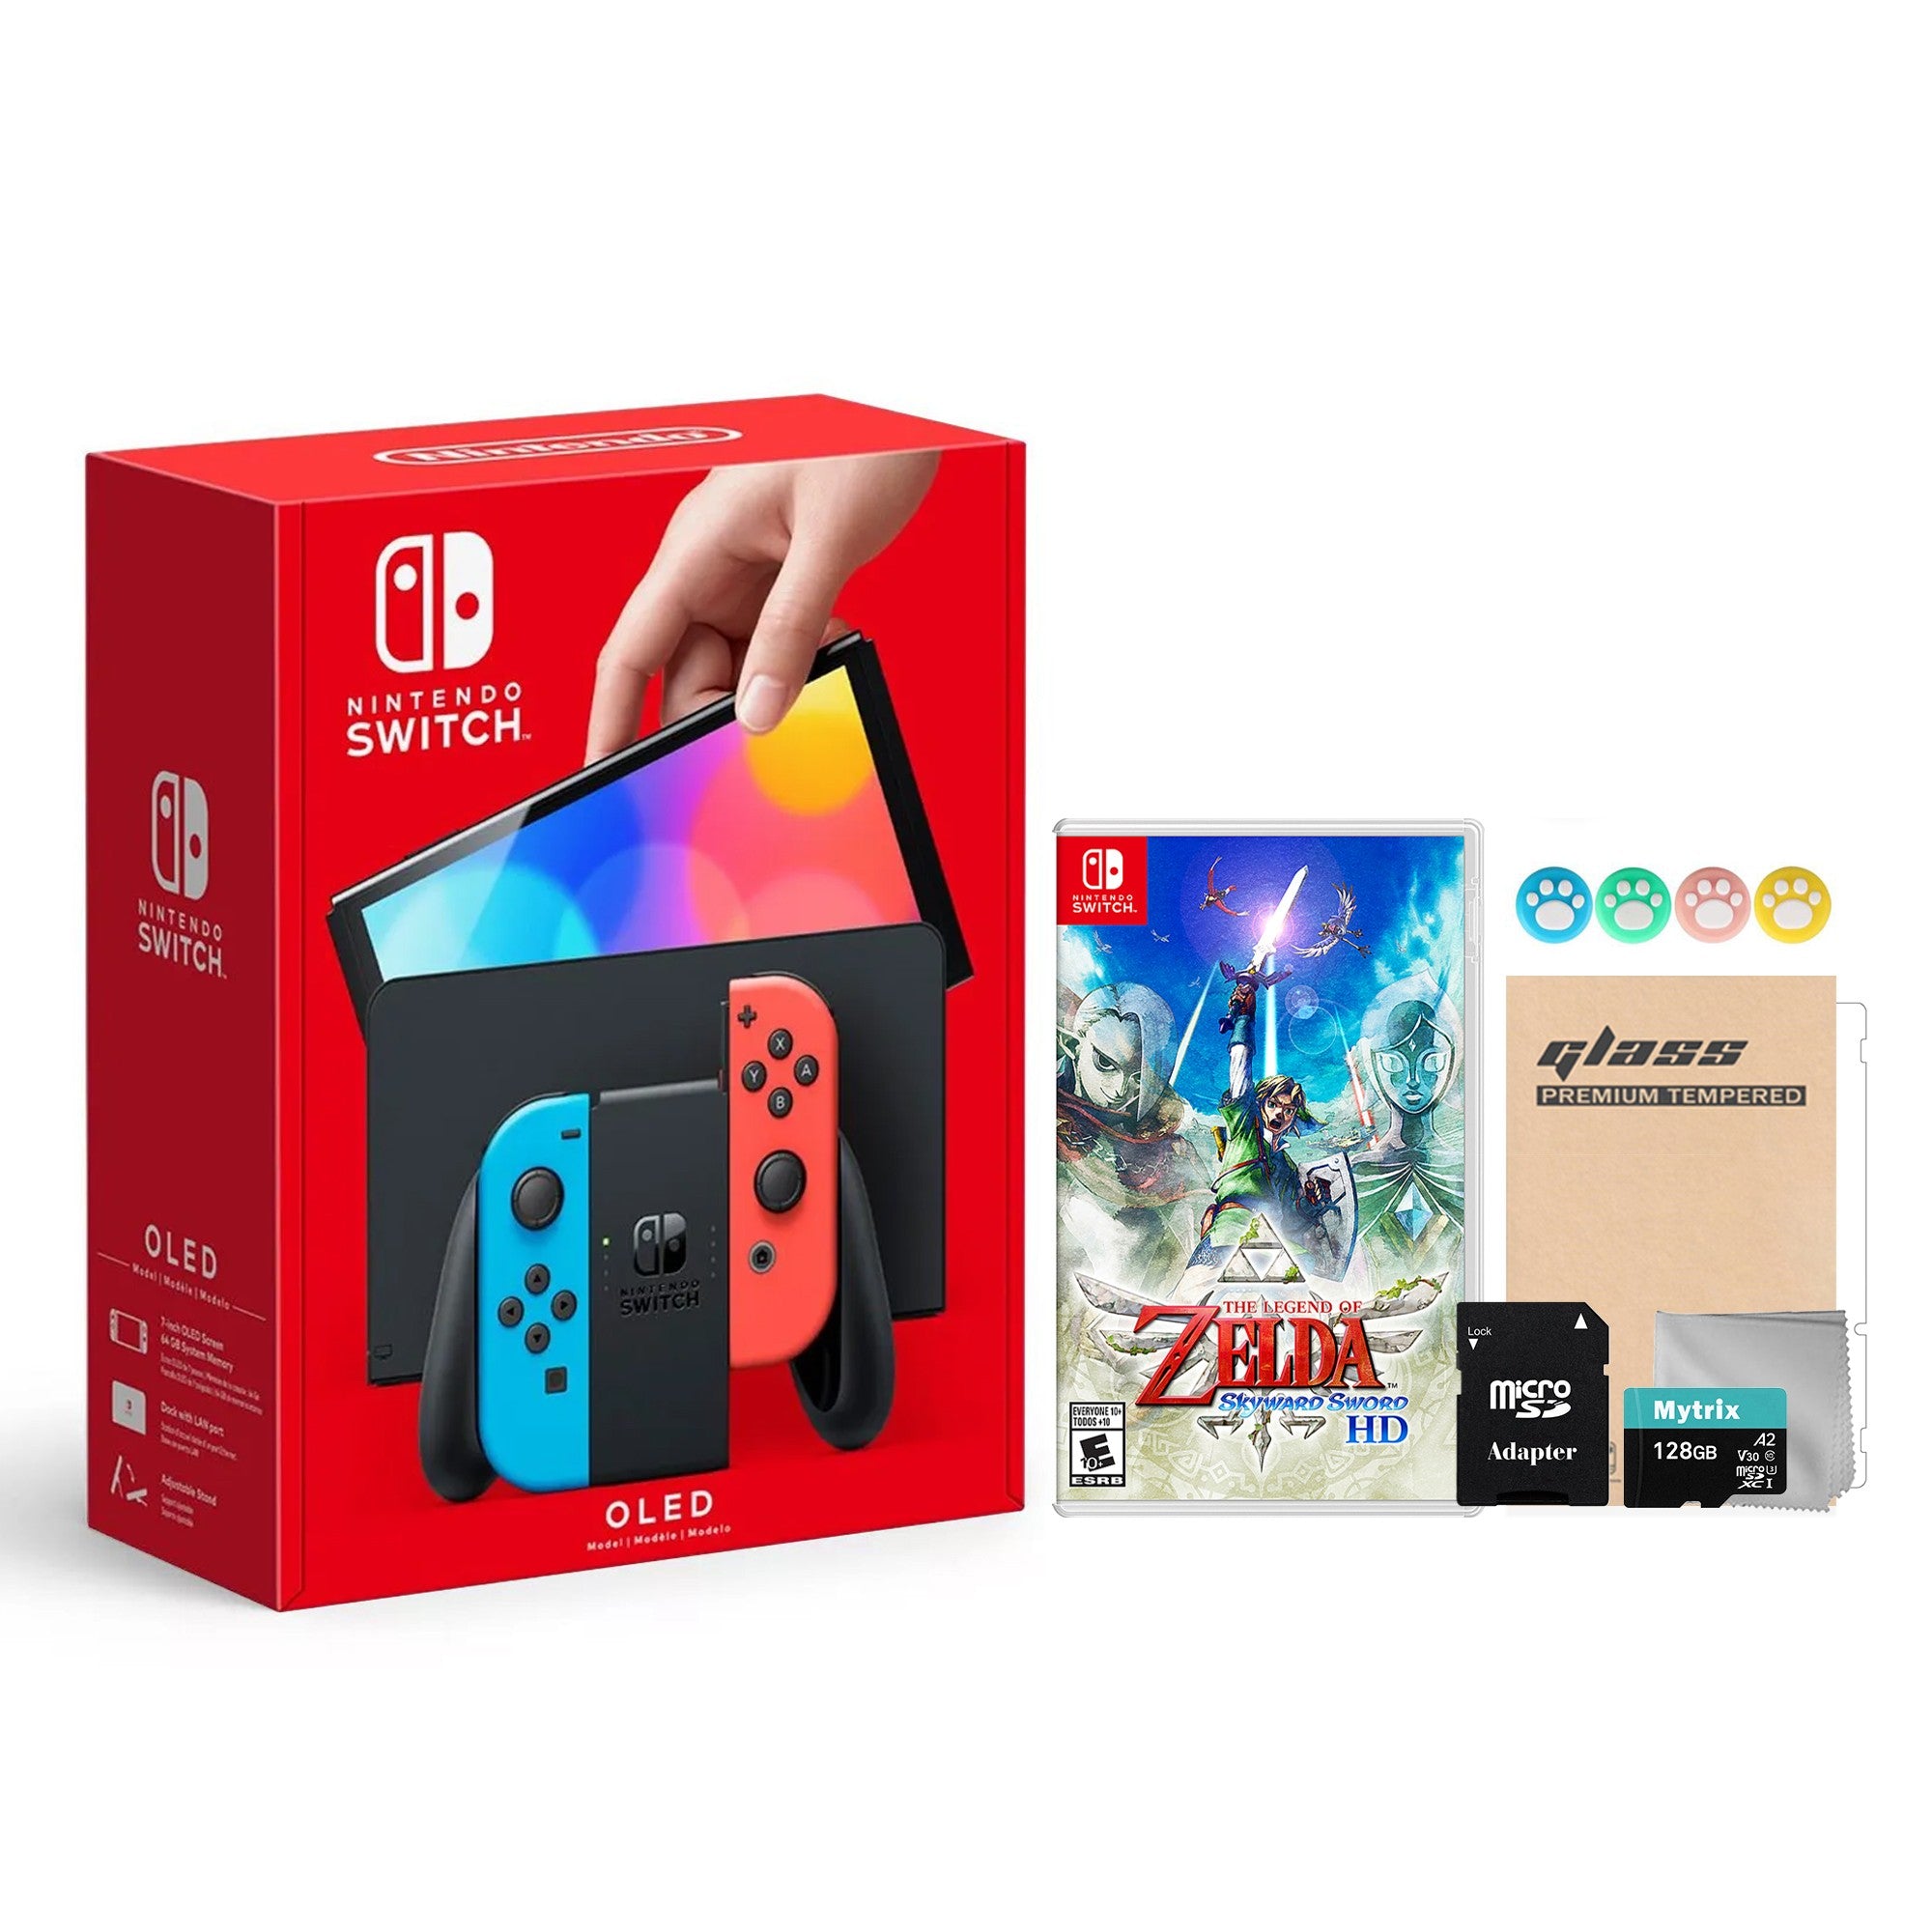 2022 New Nintendo Switch OLED Model Neon Red & Blue Joy Con 64GB Console HD Screen & LAN-Port Dock with The Legend of Zelda: Skyward Sword HD, Mytrix 128GB MicroSD Card and Accessories